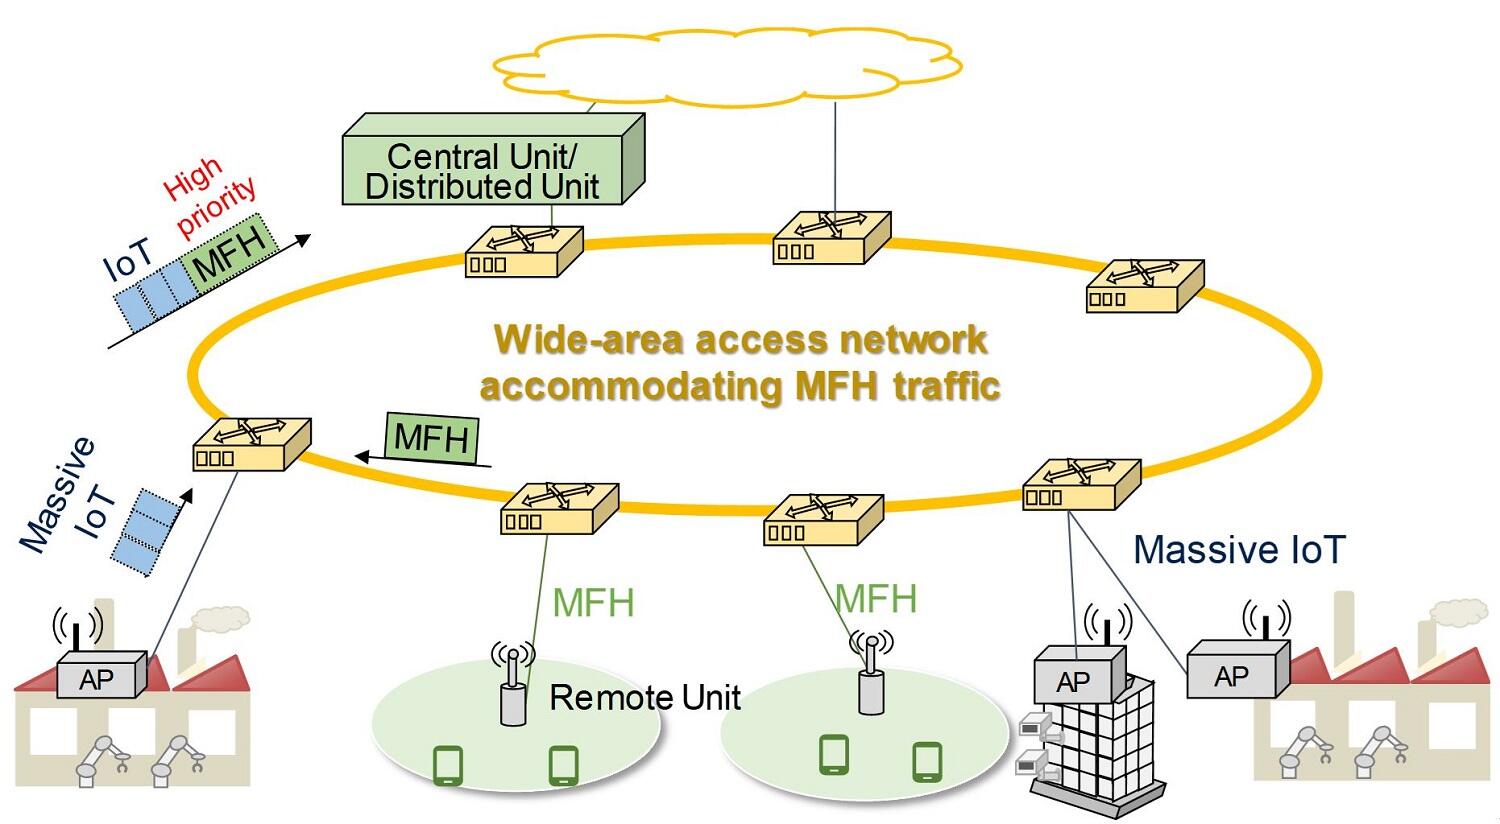 Fig. 1:  Accommodation of MFH traffic in wide-area access network.